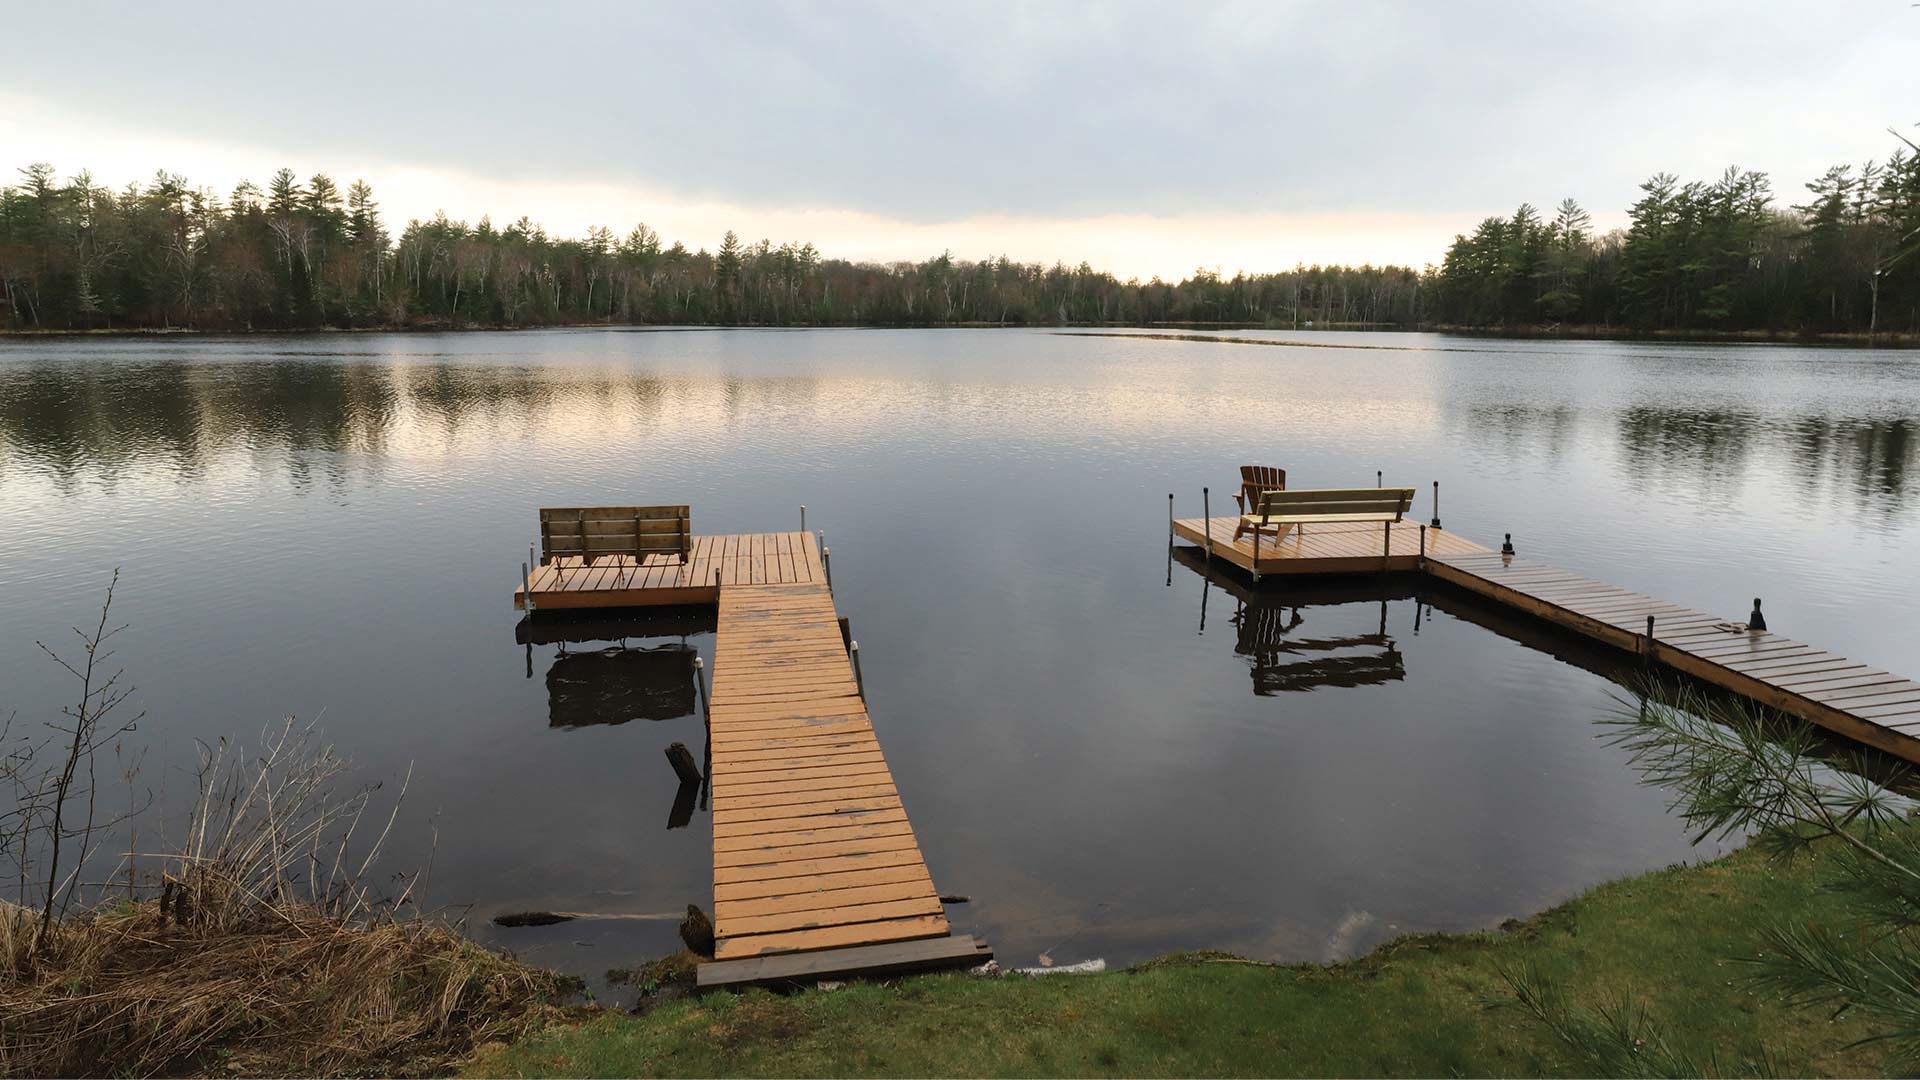 Two docks overlooking an empty lake, surrounded by trees